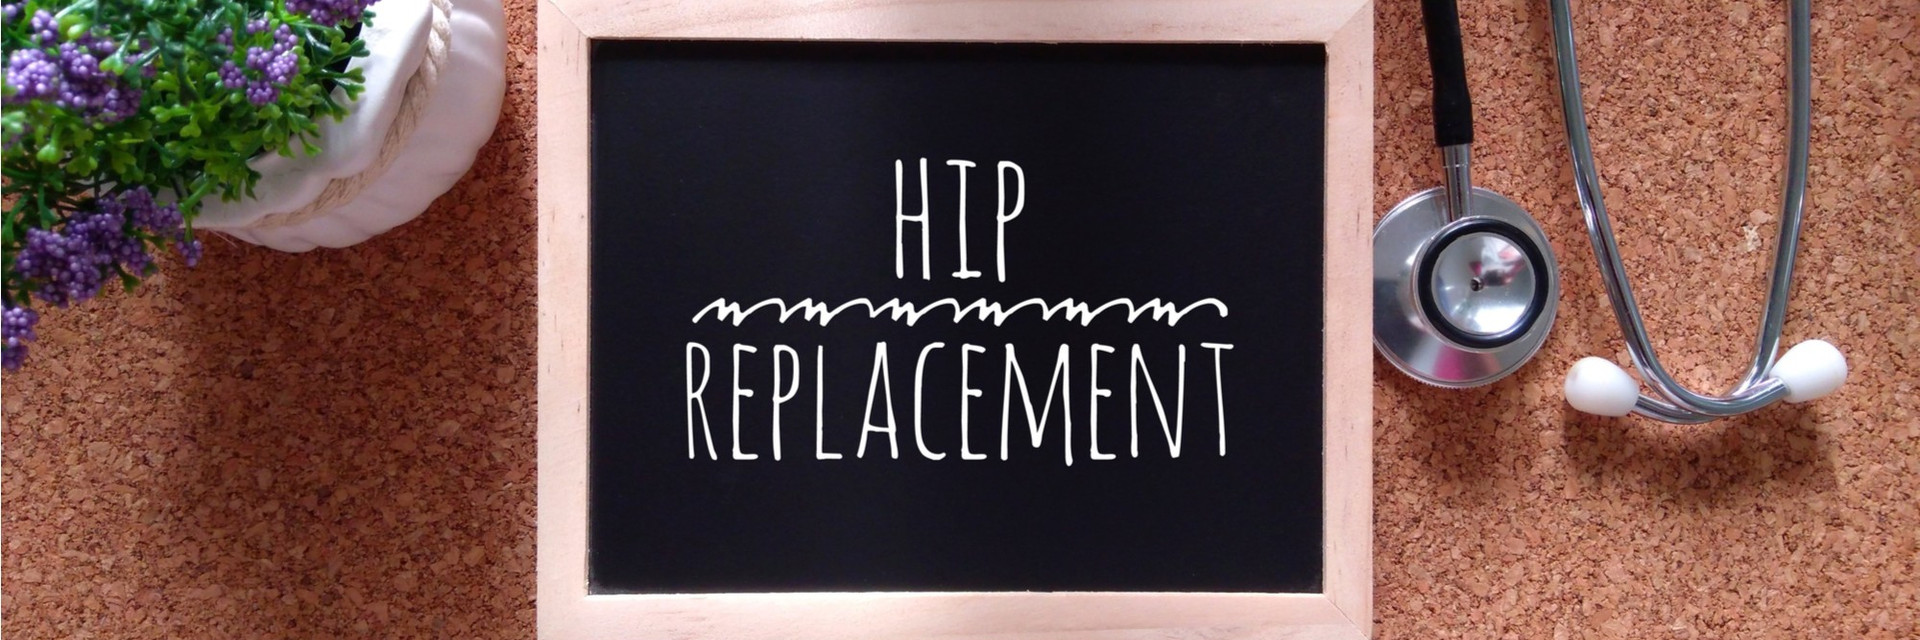 Total-Hip-Replacement-Recovery